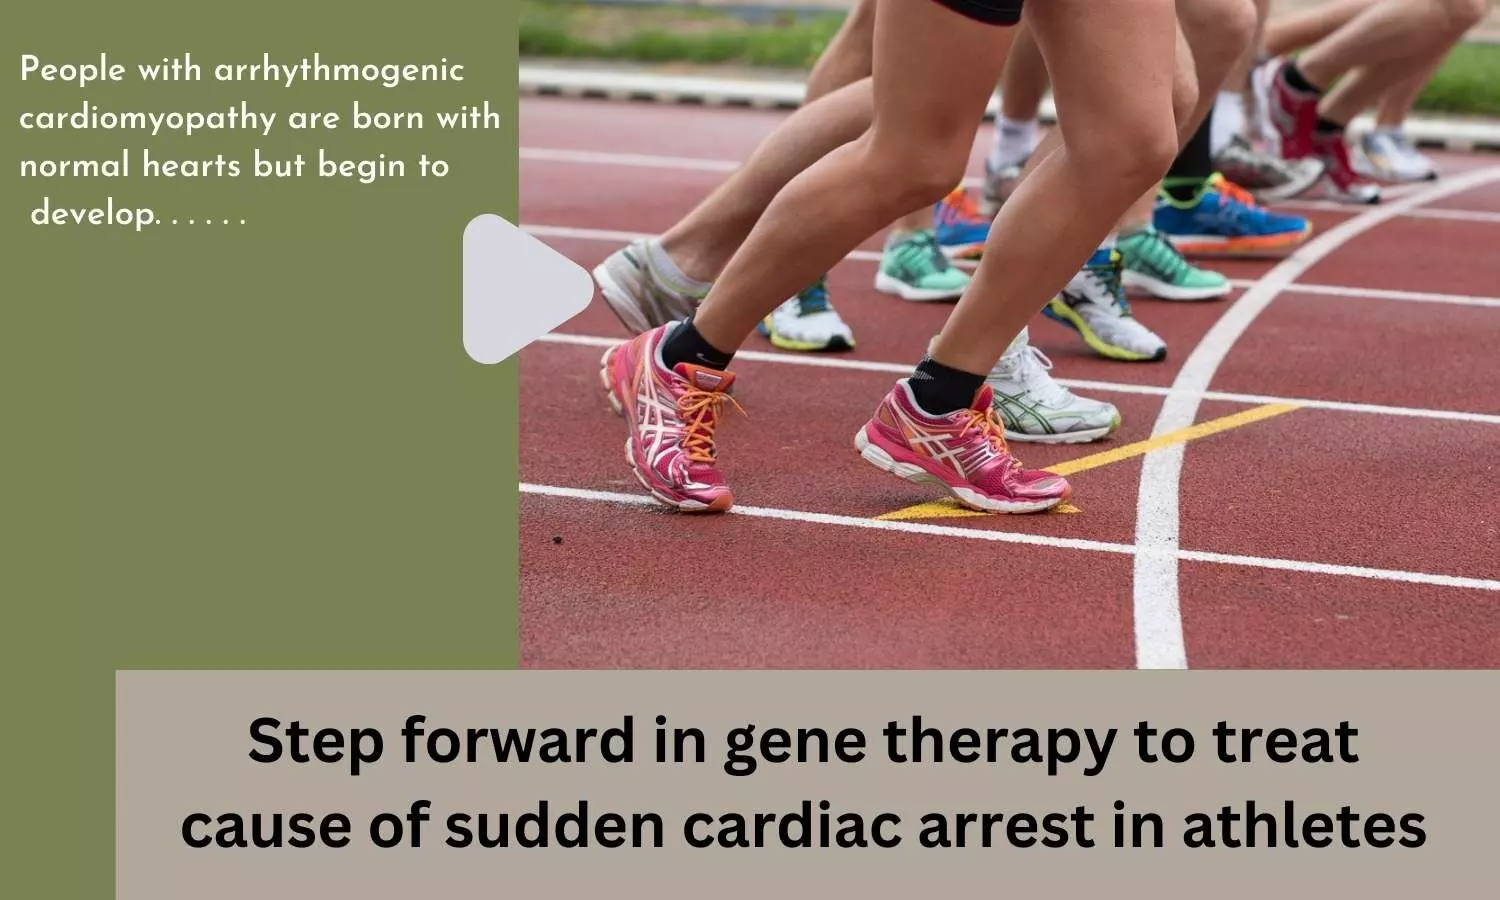 Step forward in gene therapy to treat cause of sudden cardiac arrest in athletes